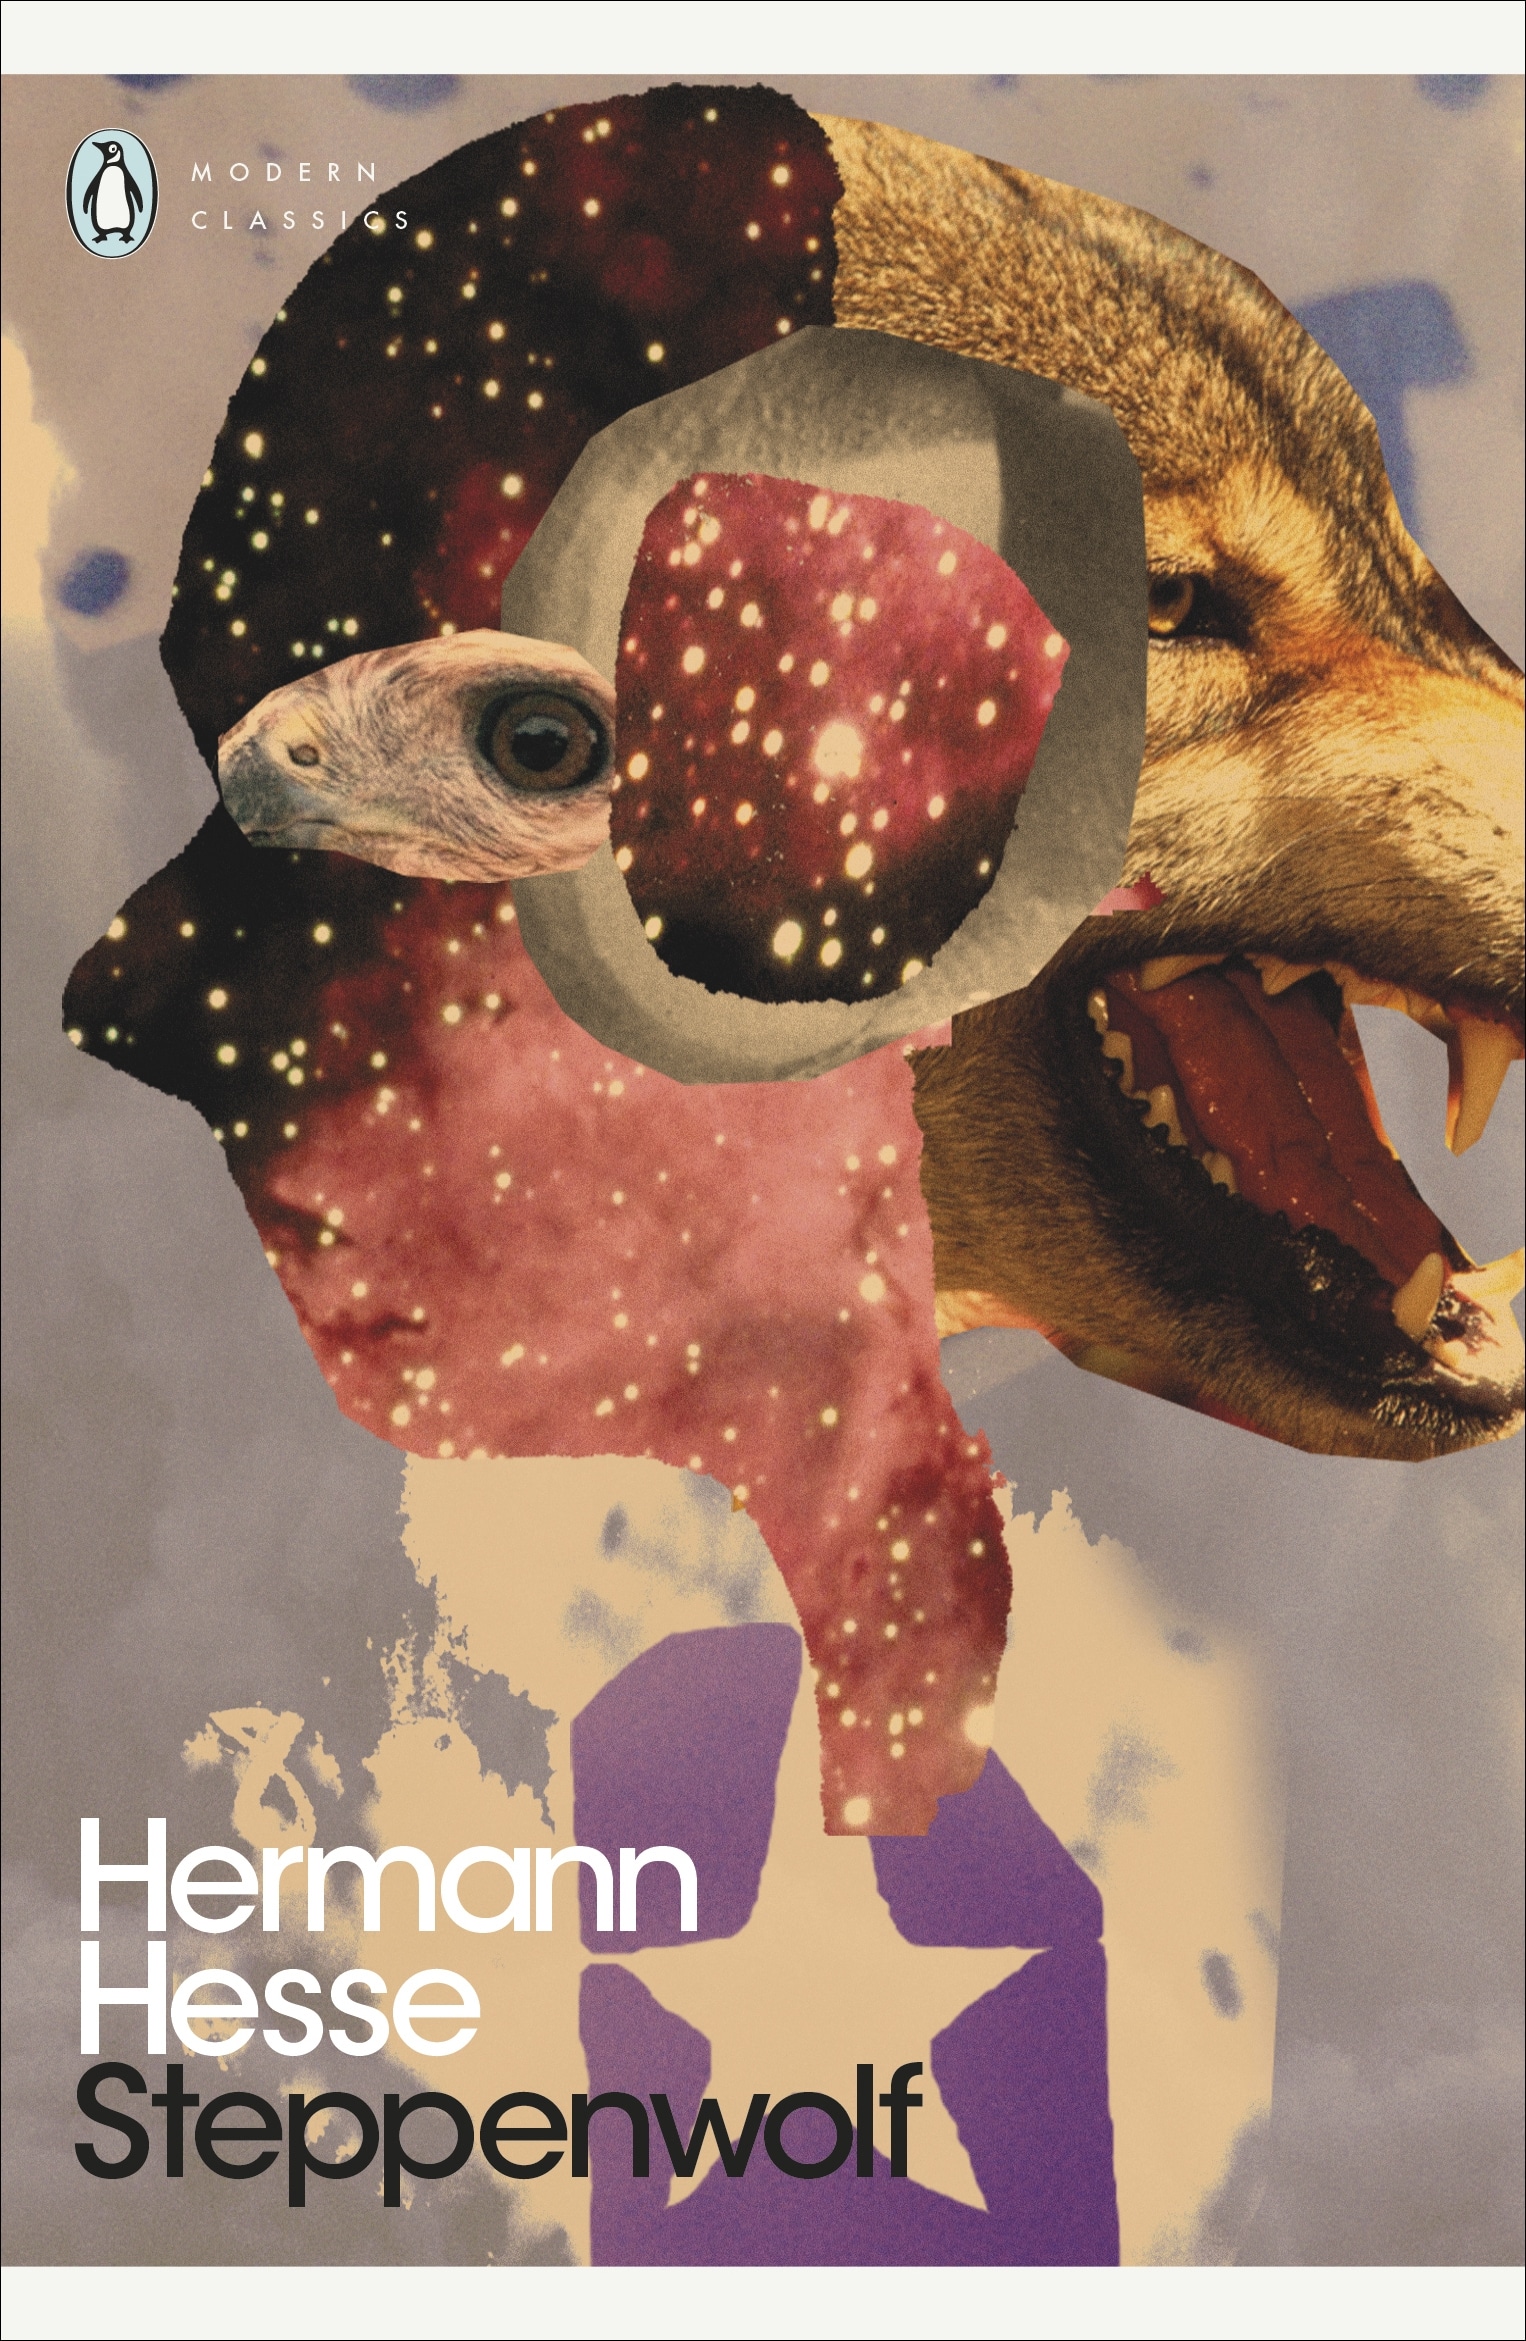 Book “Steppenwolf” by Herman Hesse — April 5, 2012